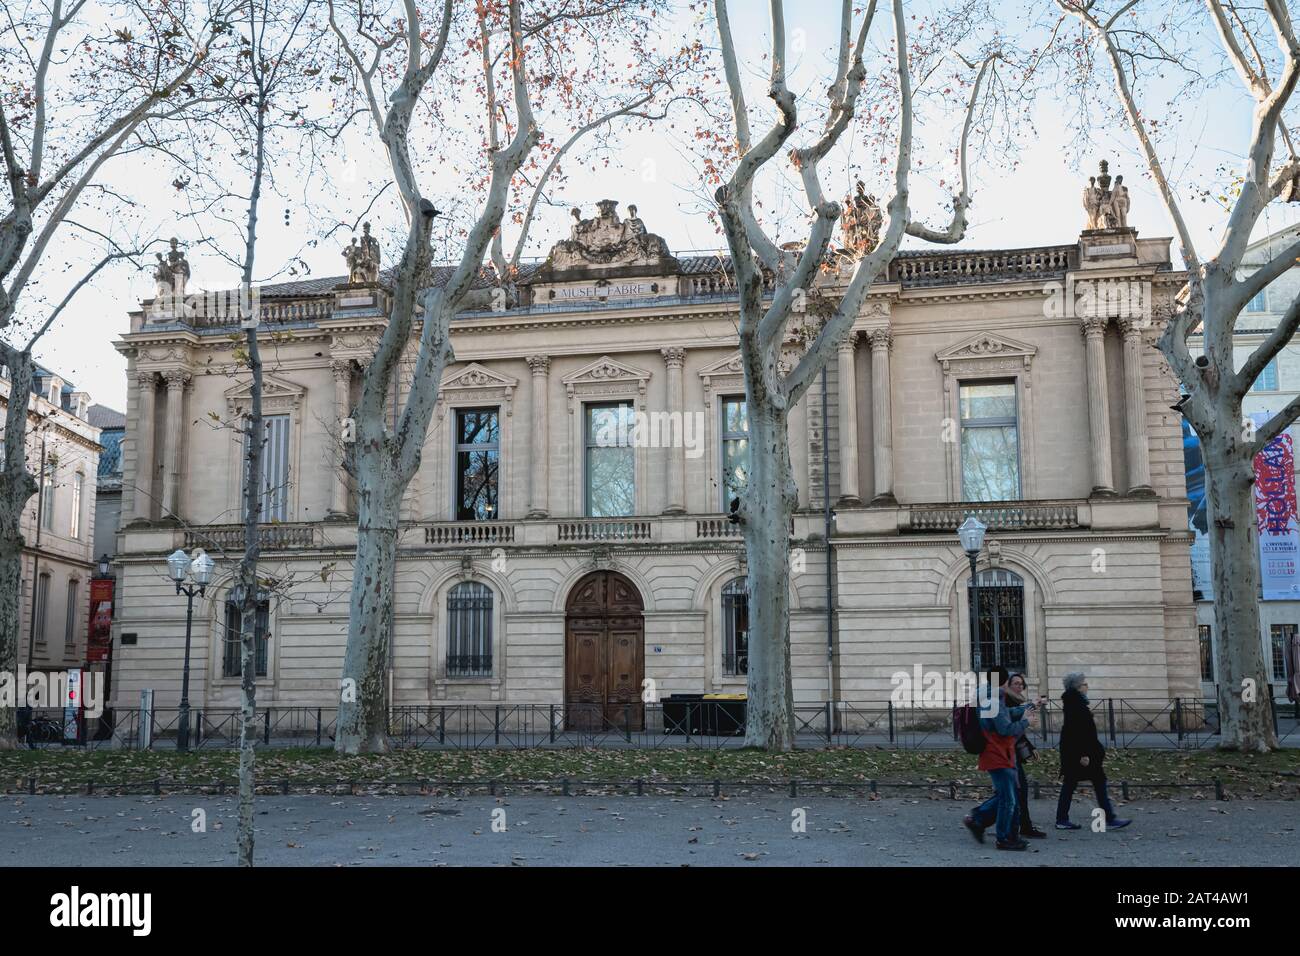 Montpellier, France - January 2, 2019: architectural detail of the Fabre museum next to the Place de la Comedie where people pass on a winter day Stock Photo